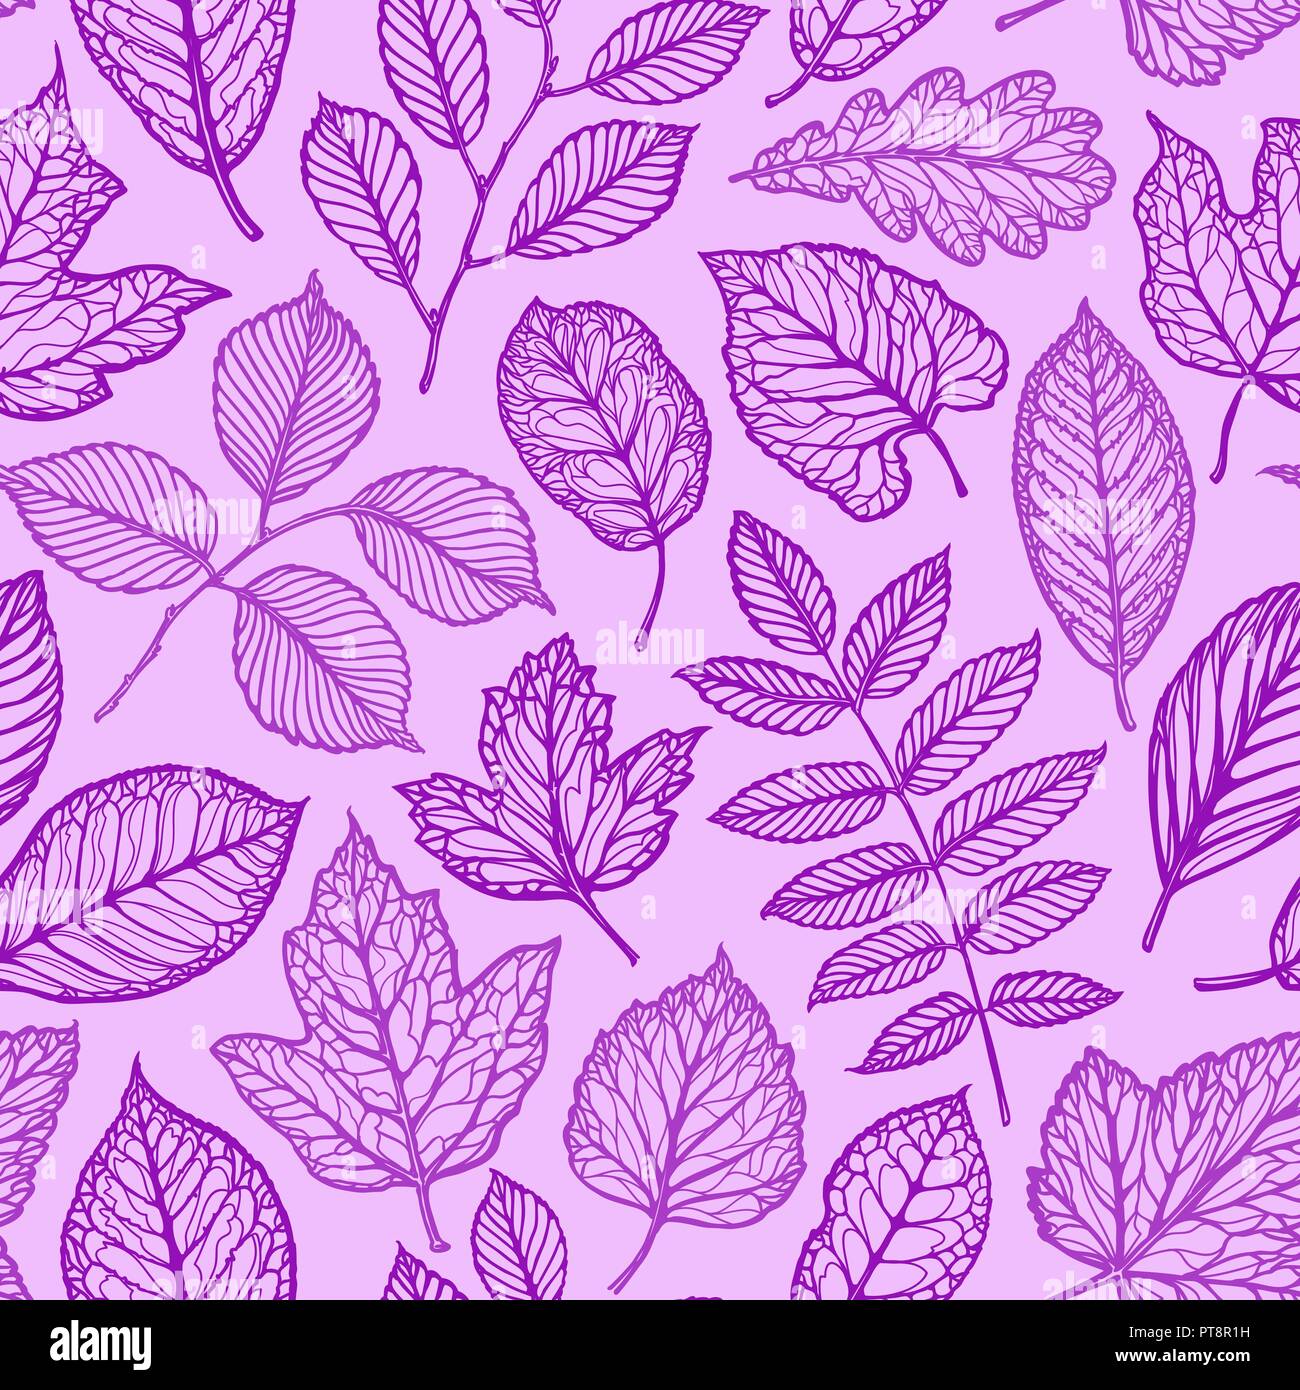 Seamless floral pattern. Nature, leaves concept. Decorative background vector illustration Stock Vector